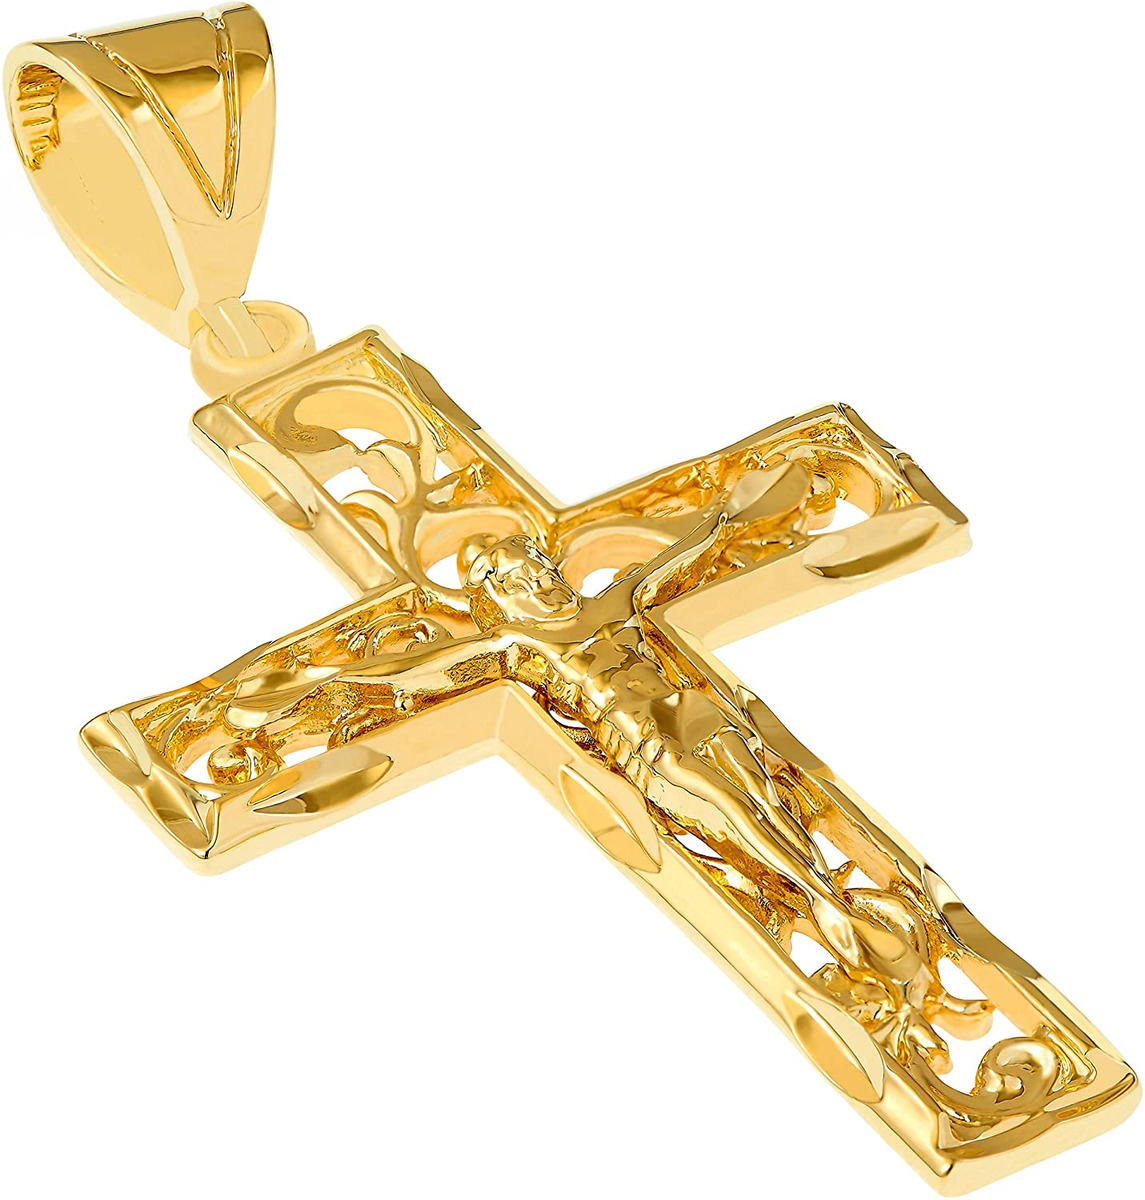 Ragnar's Cross Double-sided Sterling Silver and 24k Gold